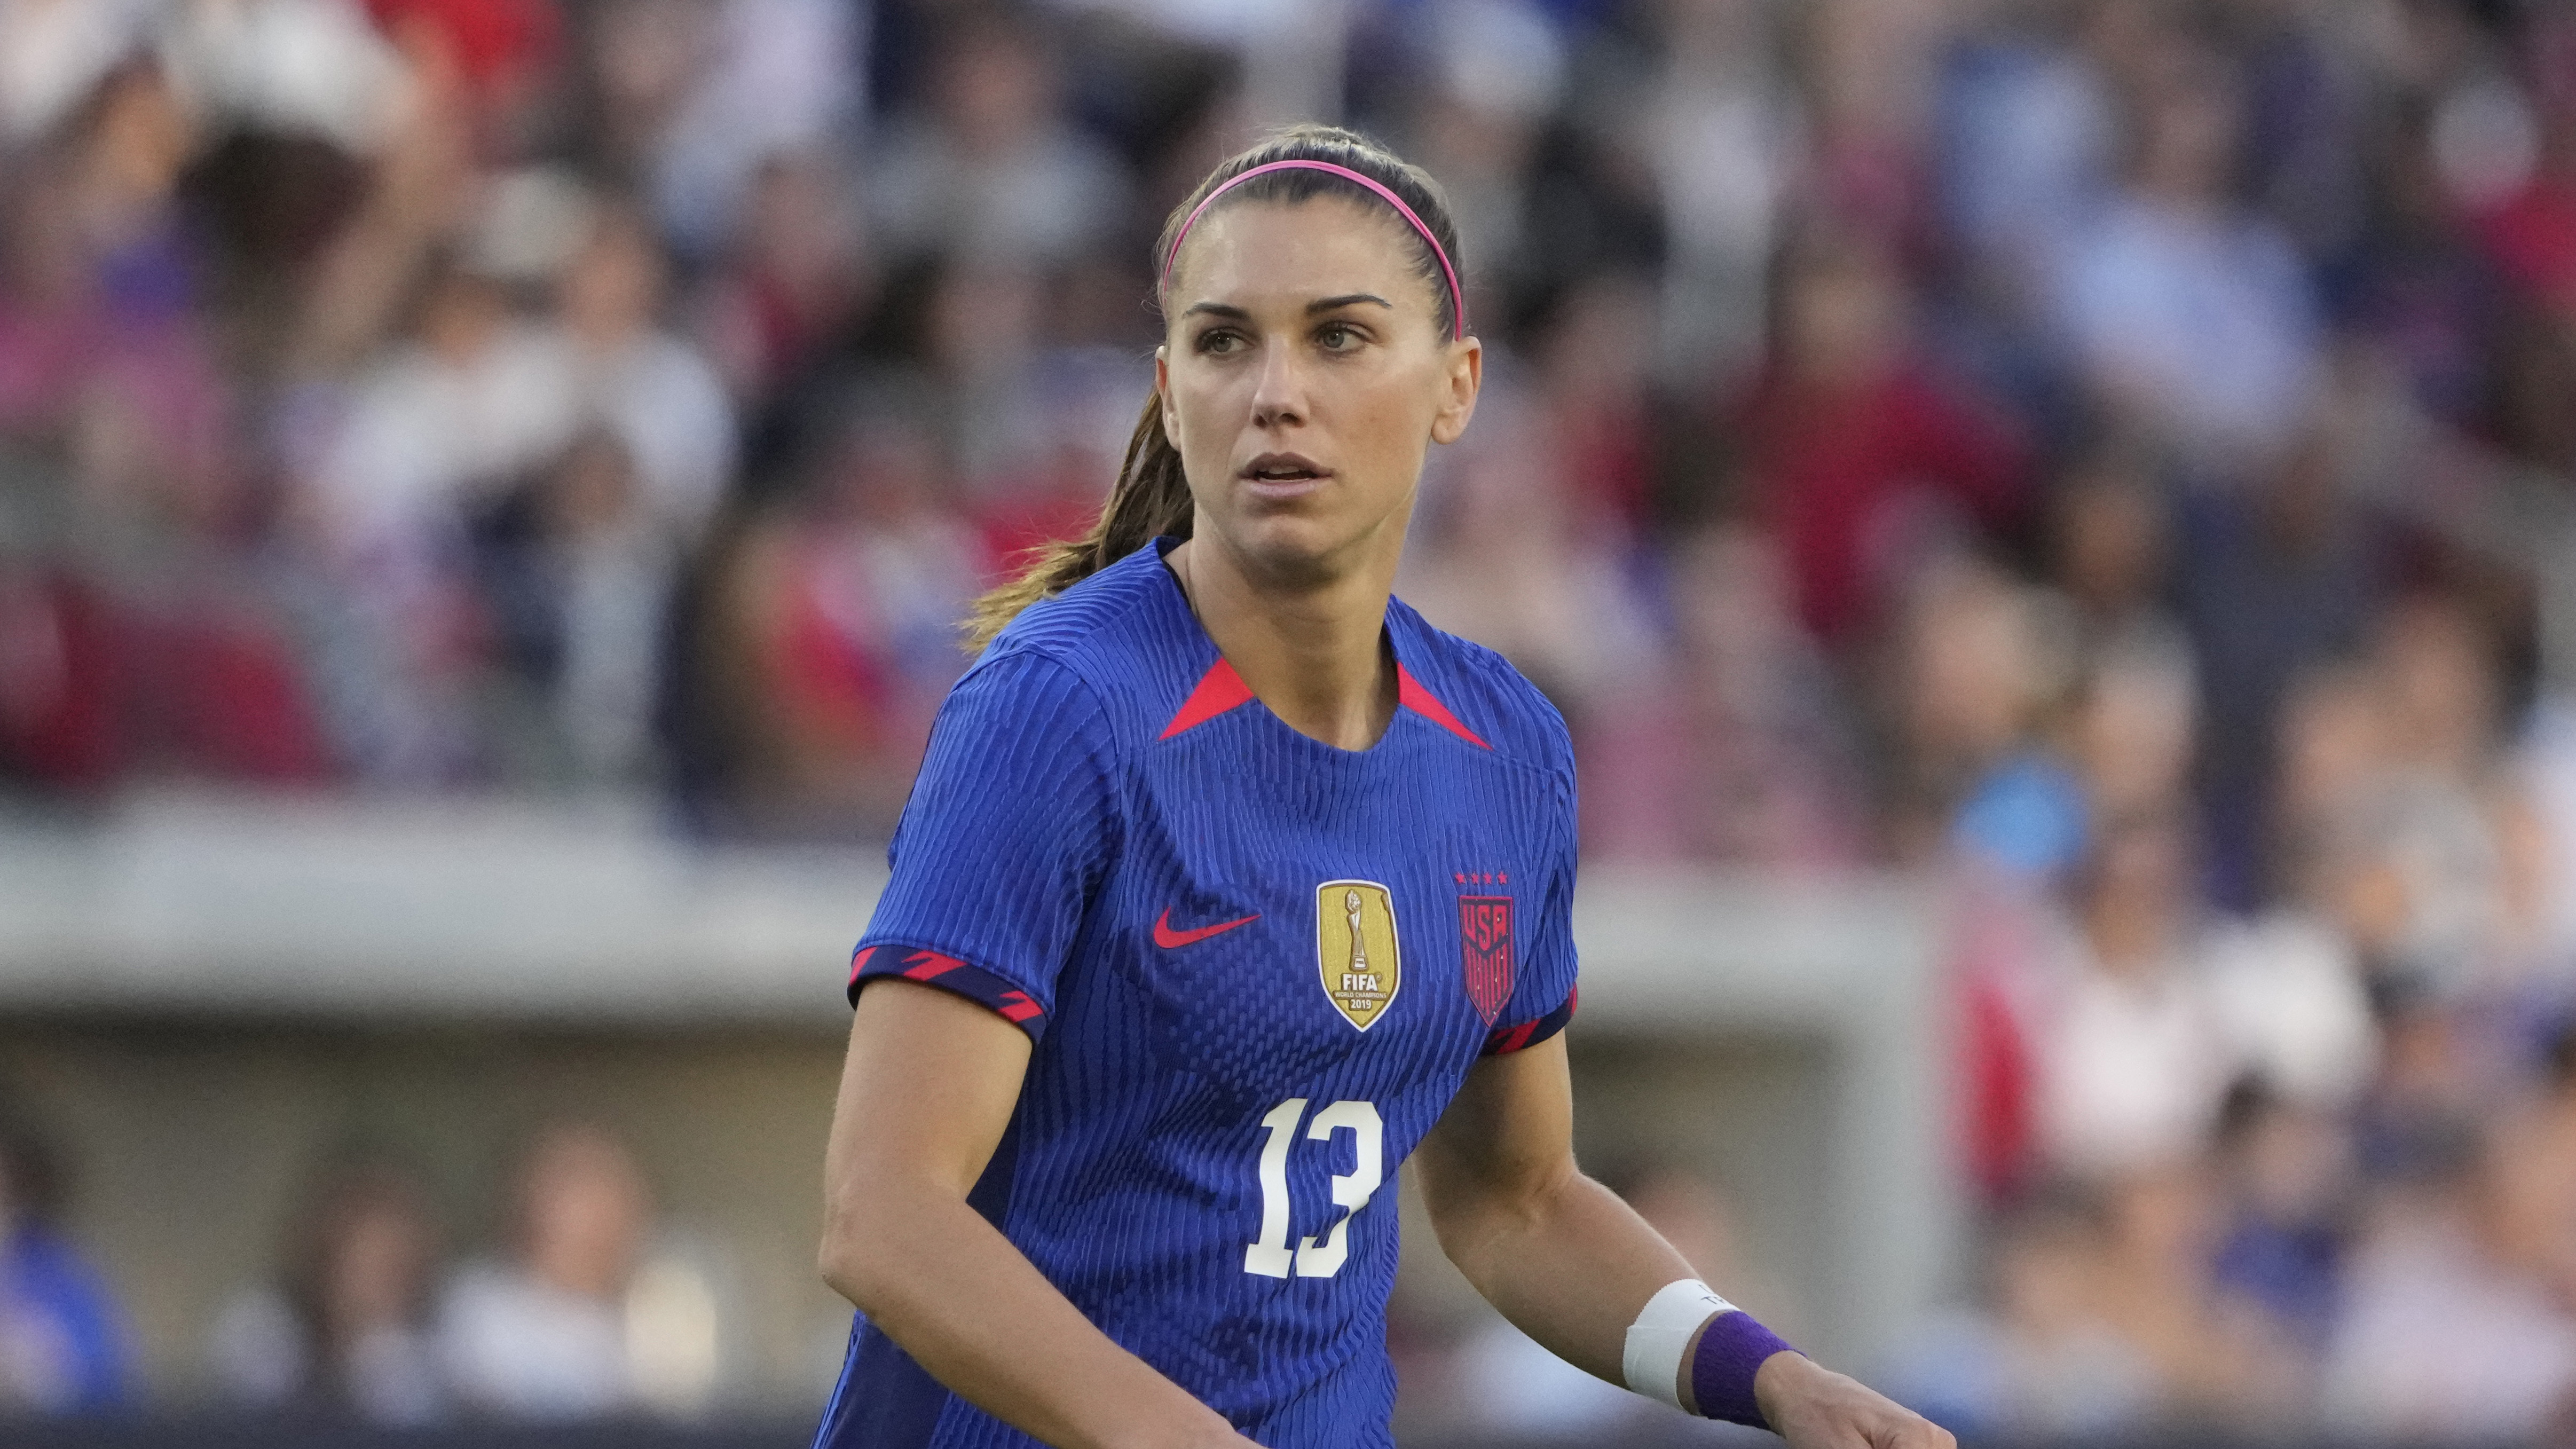 From Alex Morgan to Ada Hegerberg these are the stars to watch at